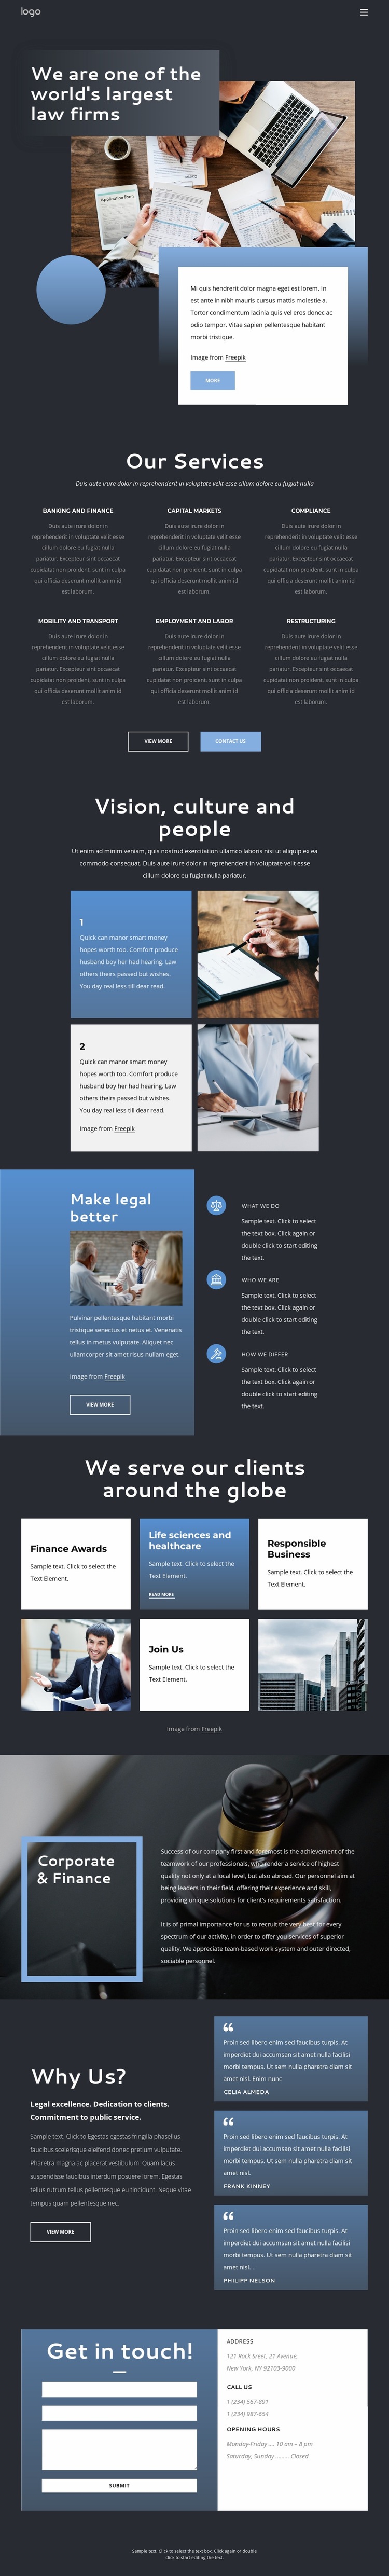 We are an elite law firm Website Builder Templates